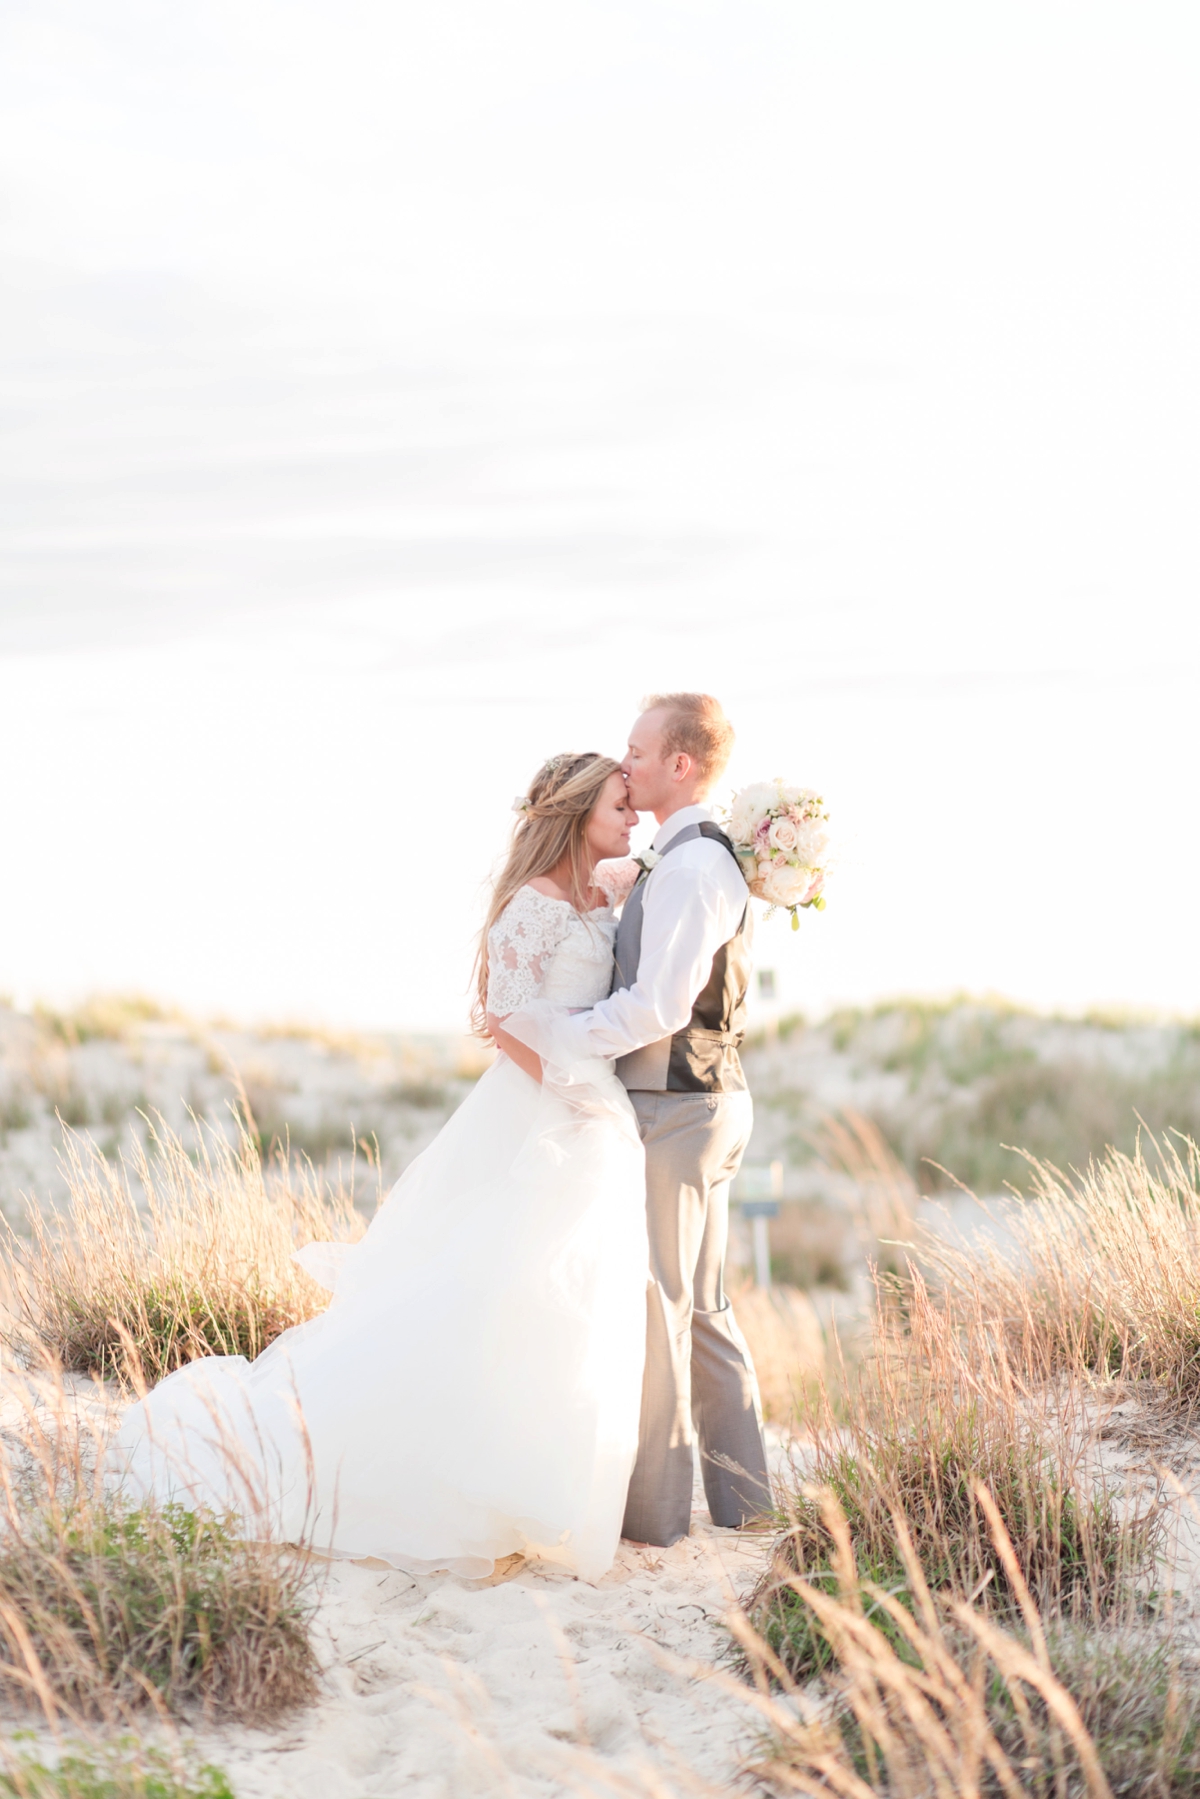 Bride & Groom Portrait | Cape Charles Wedding Photography by Angie McPherson Photography